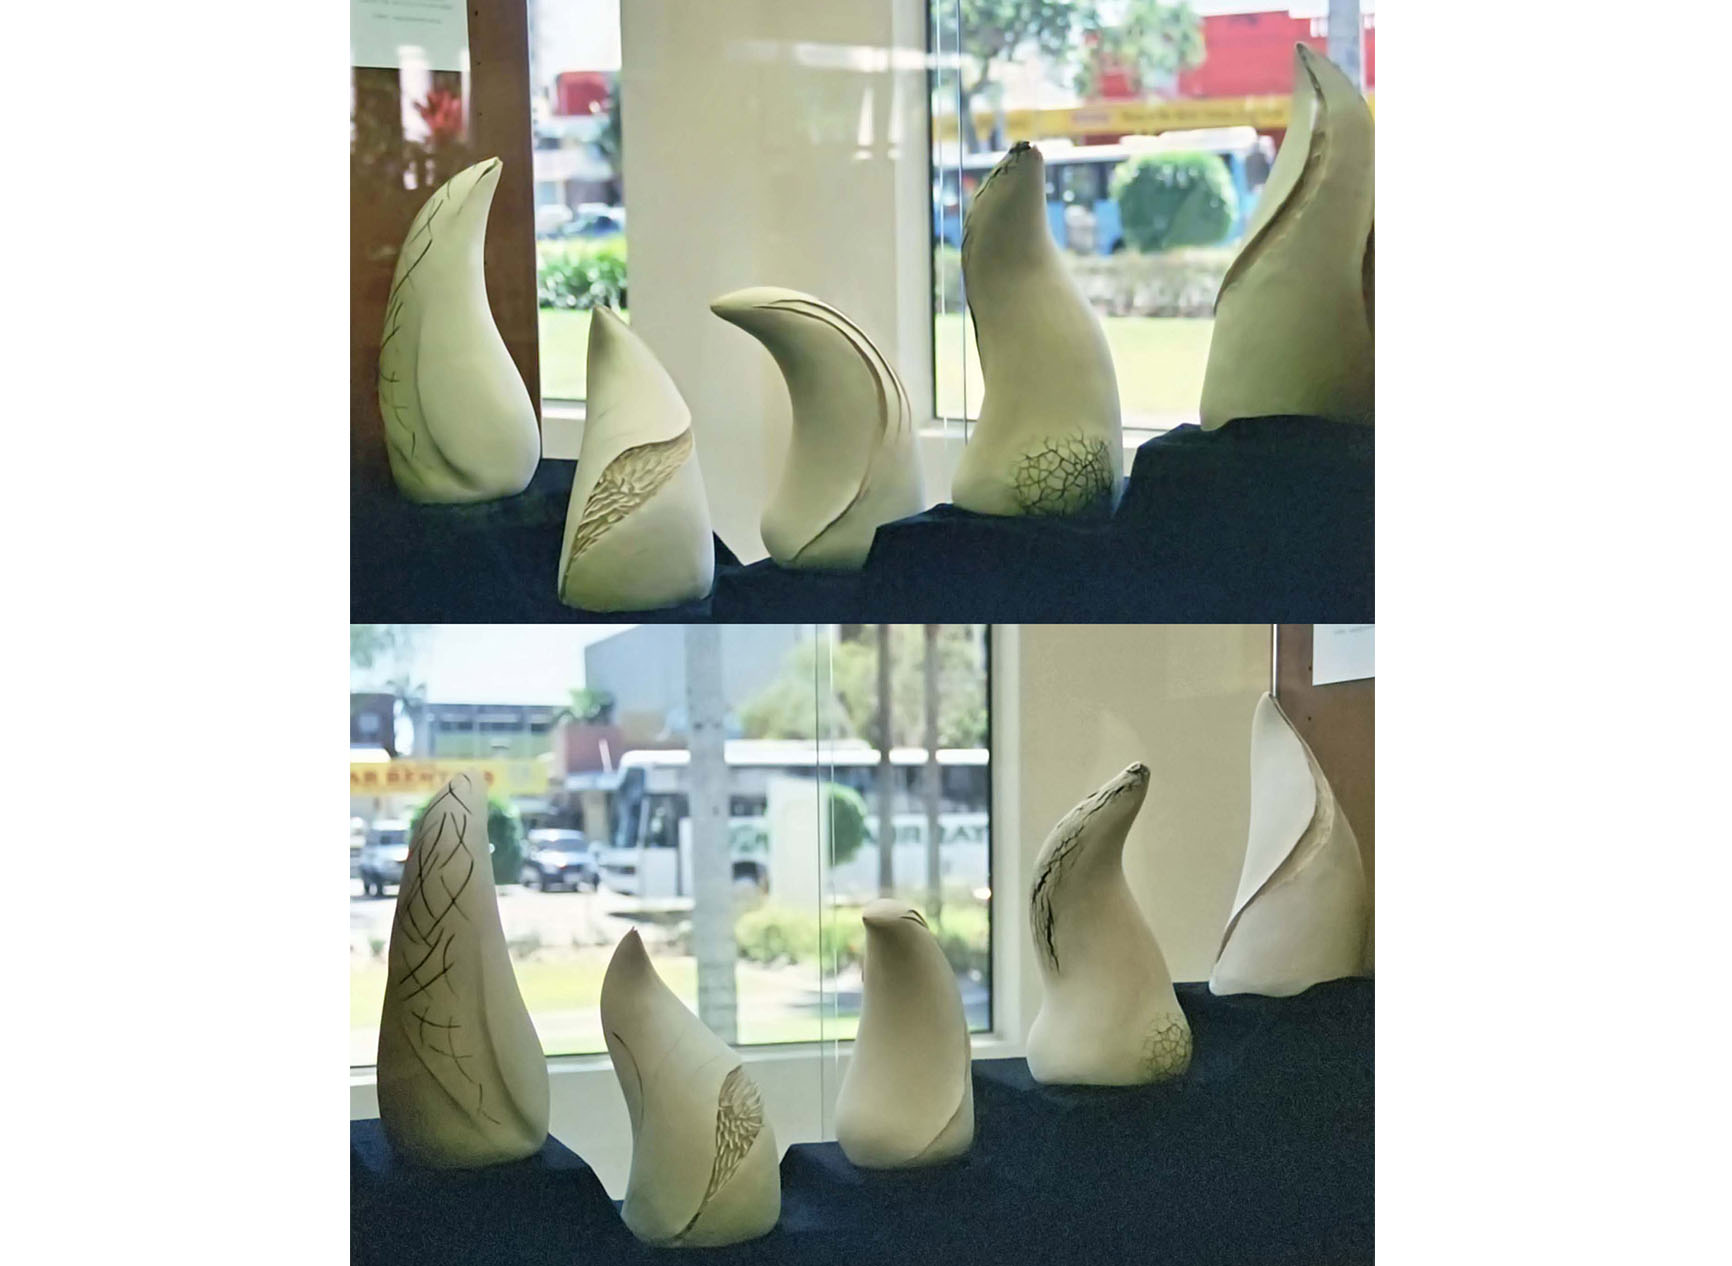 Five sculptures, each representing crocodile teeth, each with marks of nature on them in the Cairns City Library